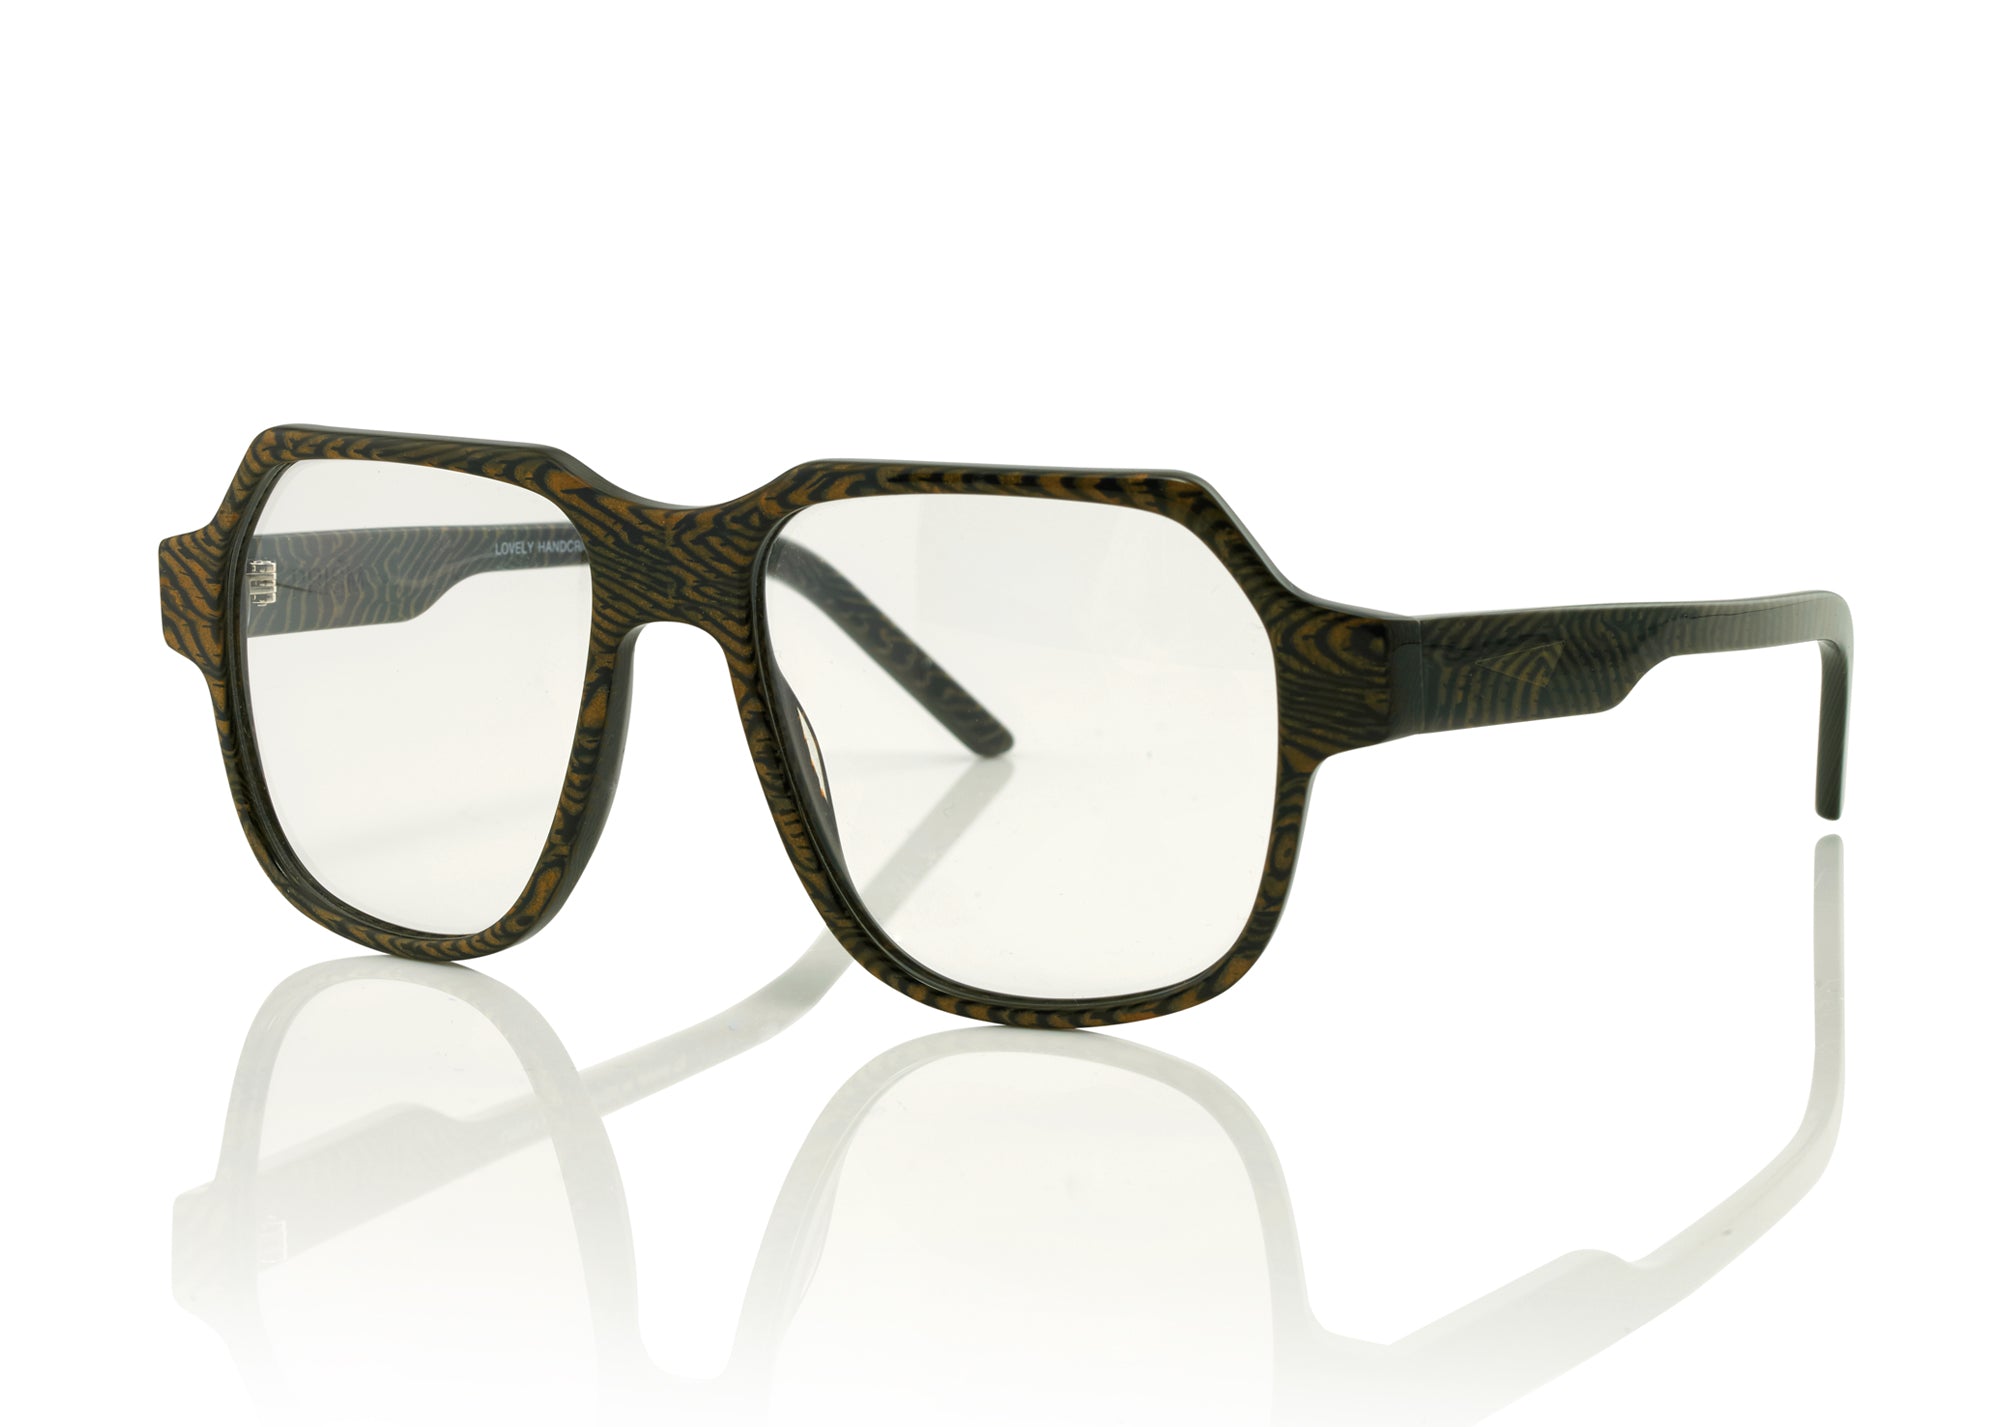 DAKOTA - Tiger Eye. These are a modern interpretation of the retro aviator frame. These lightweight frames, and the small to medium sized style is suitable for smaller face shapes with its compact dimensions, making them the perfect optical choice for your prescription lenses.